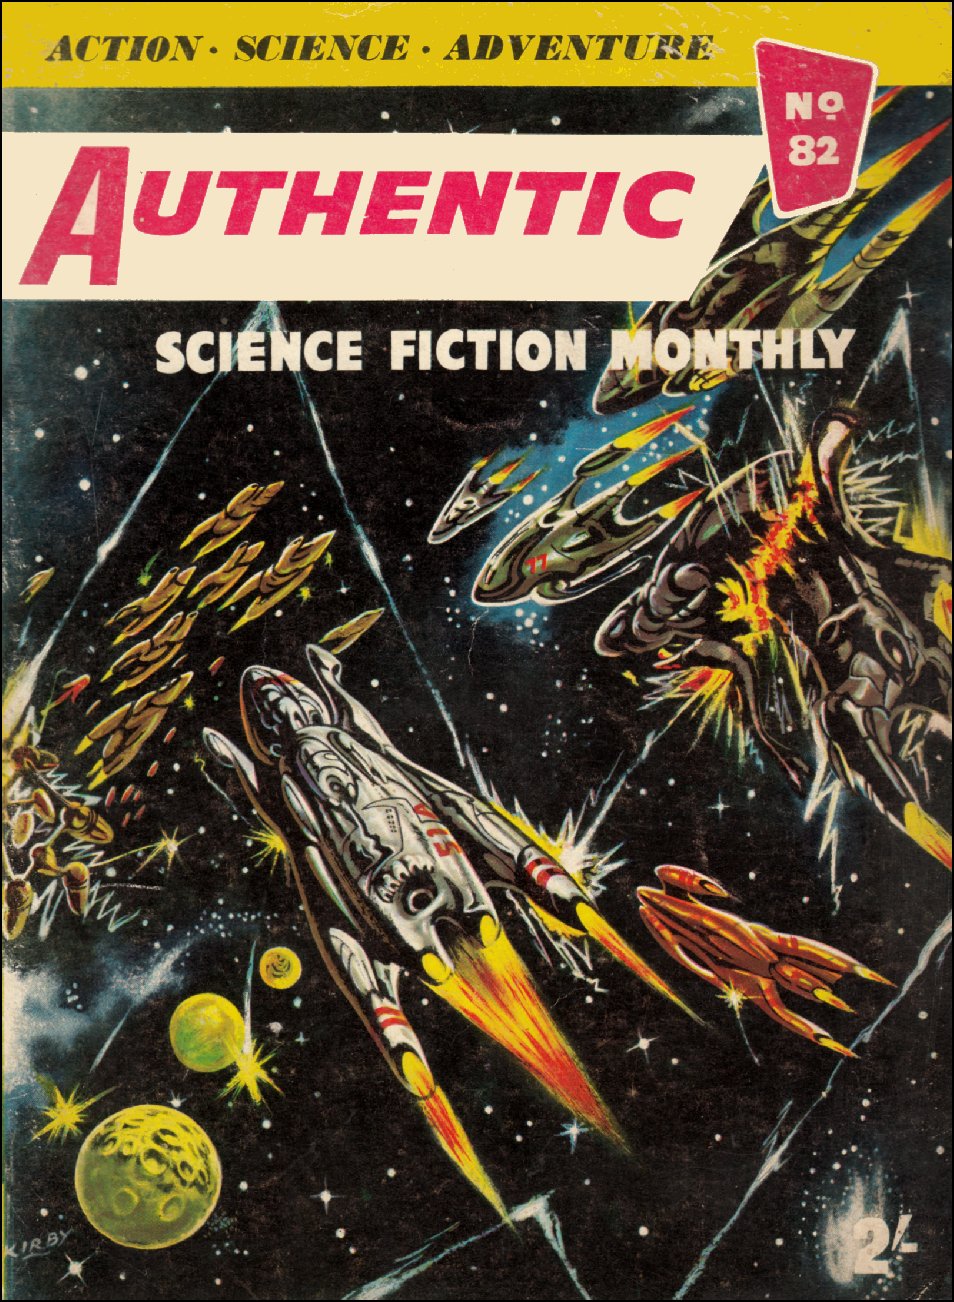 Authentic Science Fiction Monthly Number 82